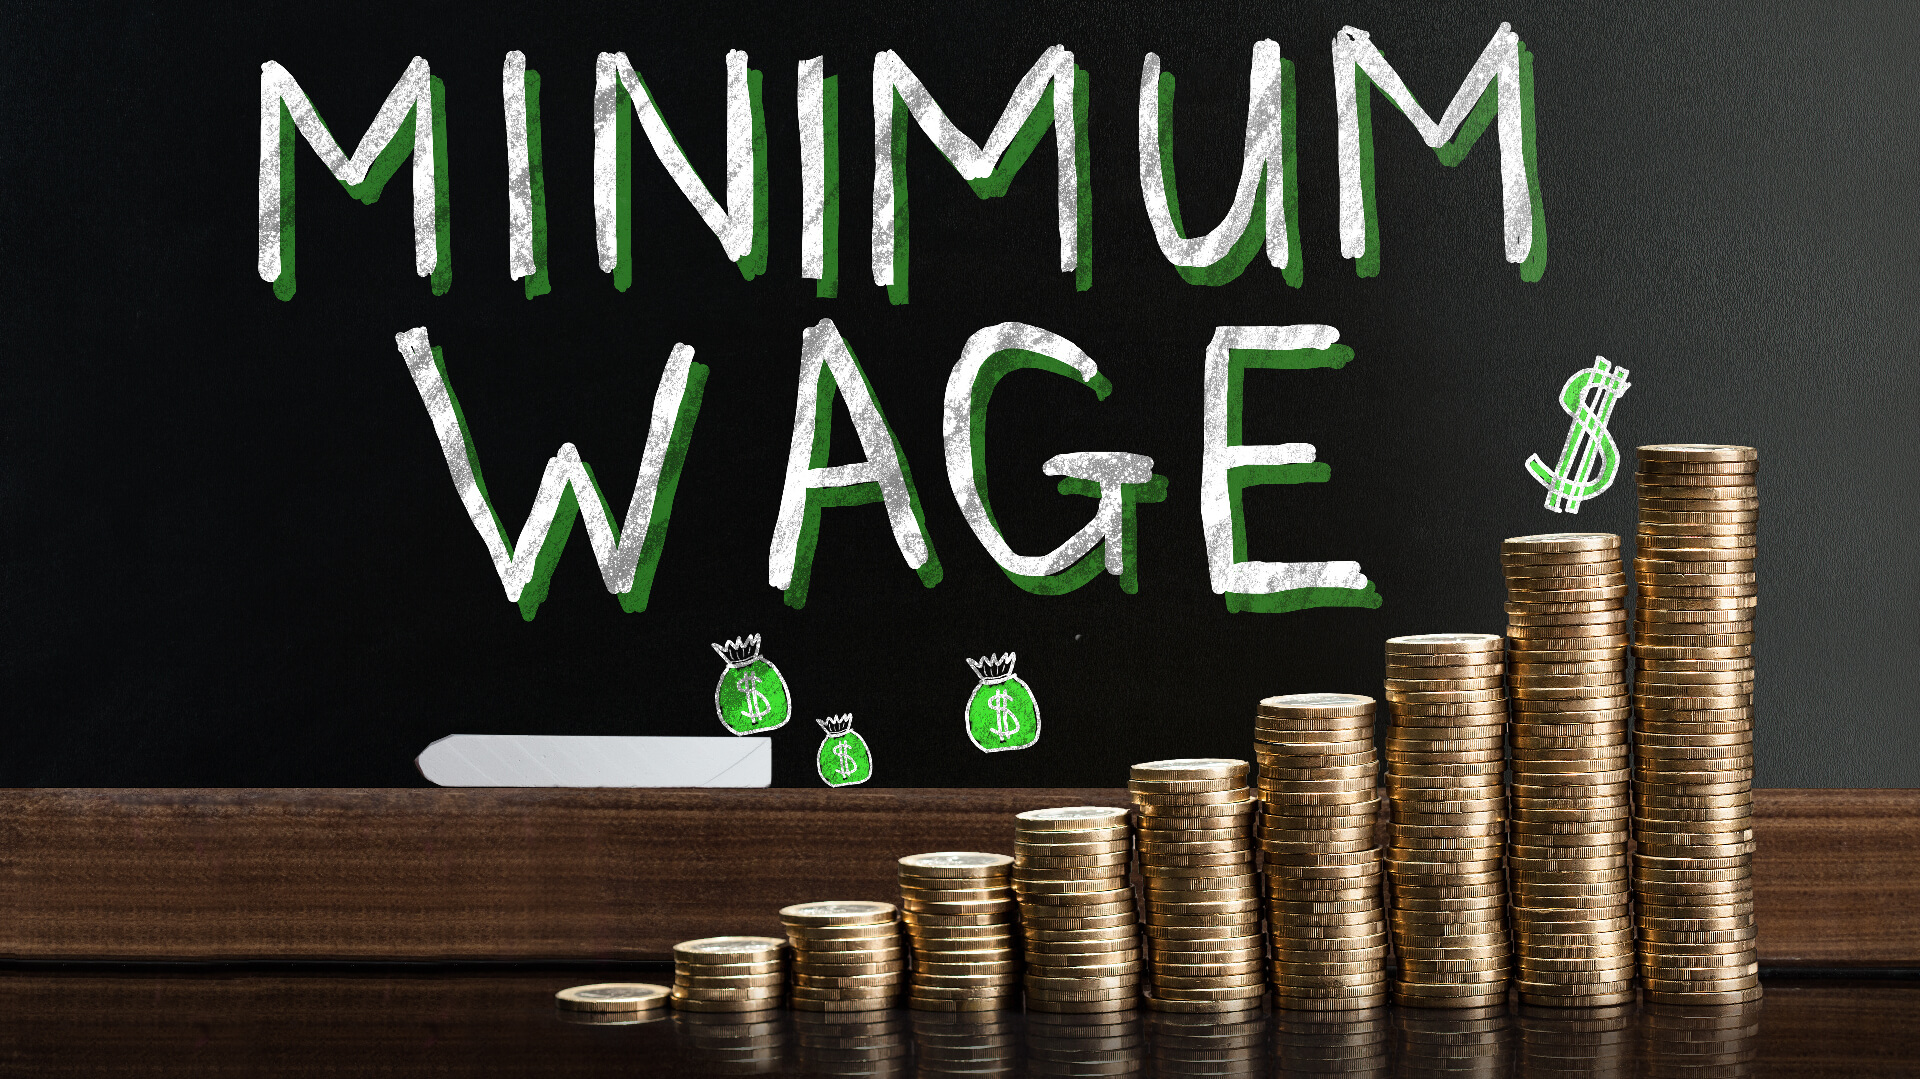 How minimum wage laws harm and exclude Learn Liberty